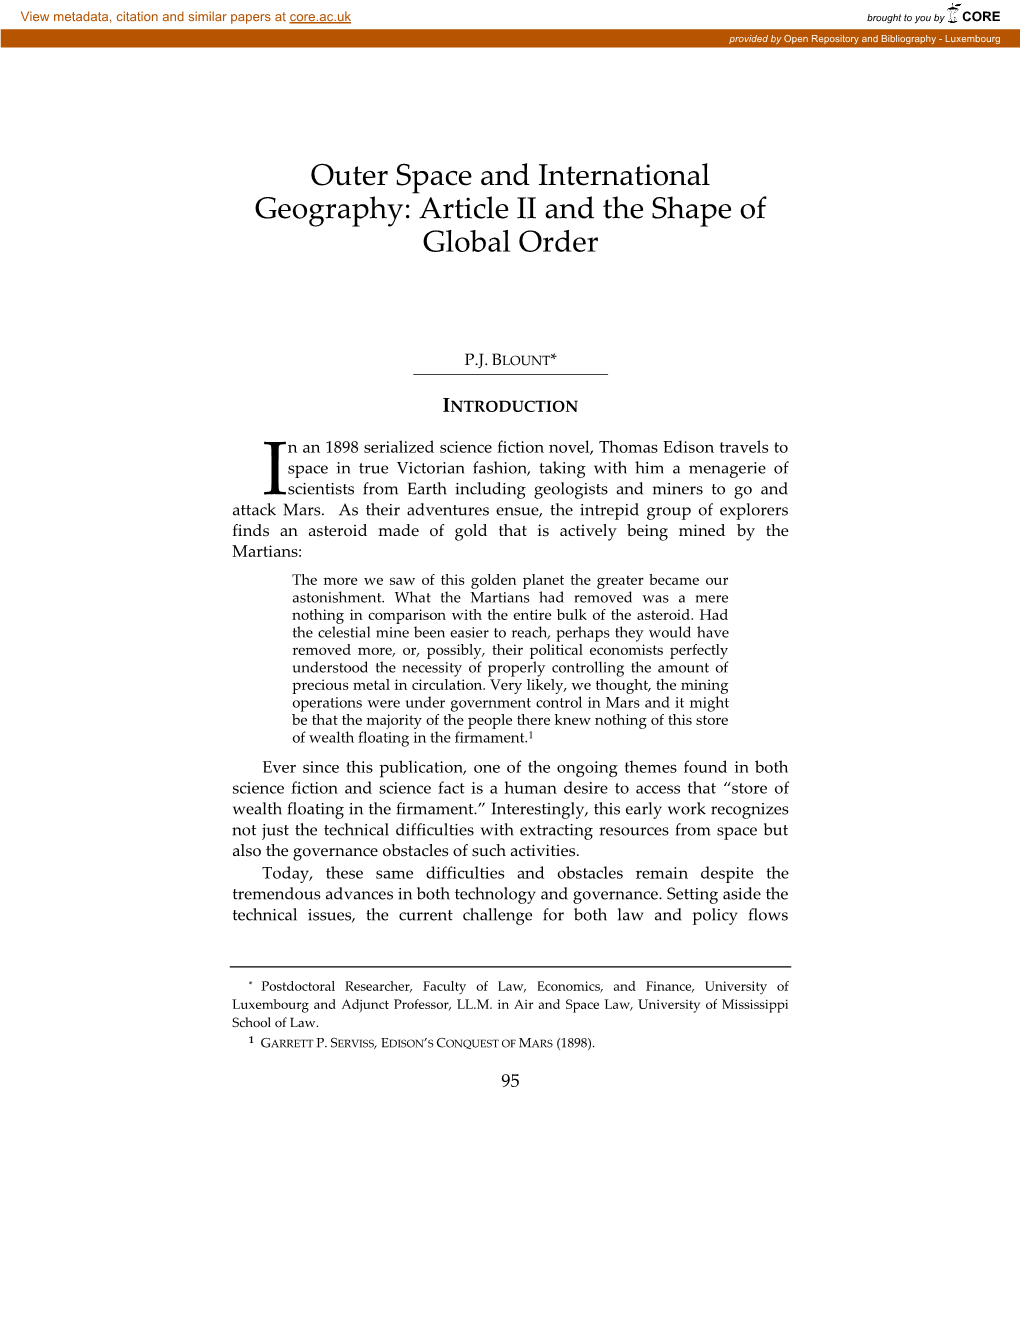 Outer Space and International Geography: Article II and the Shape of Global Order